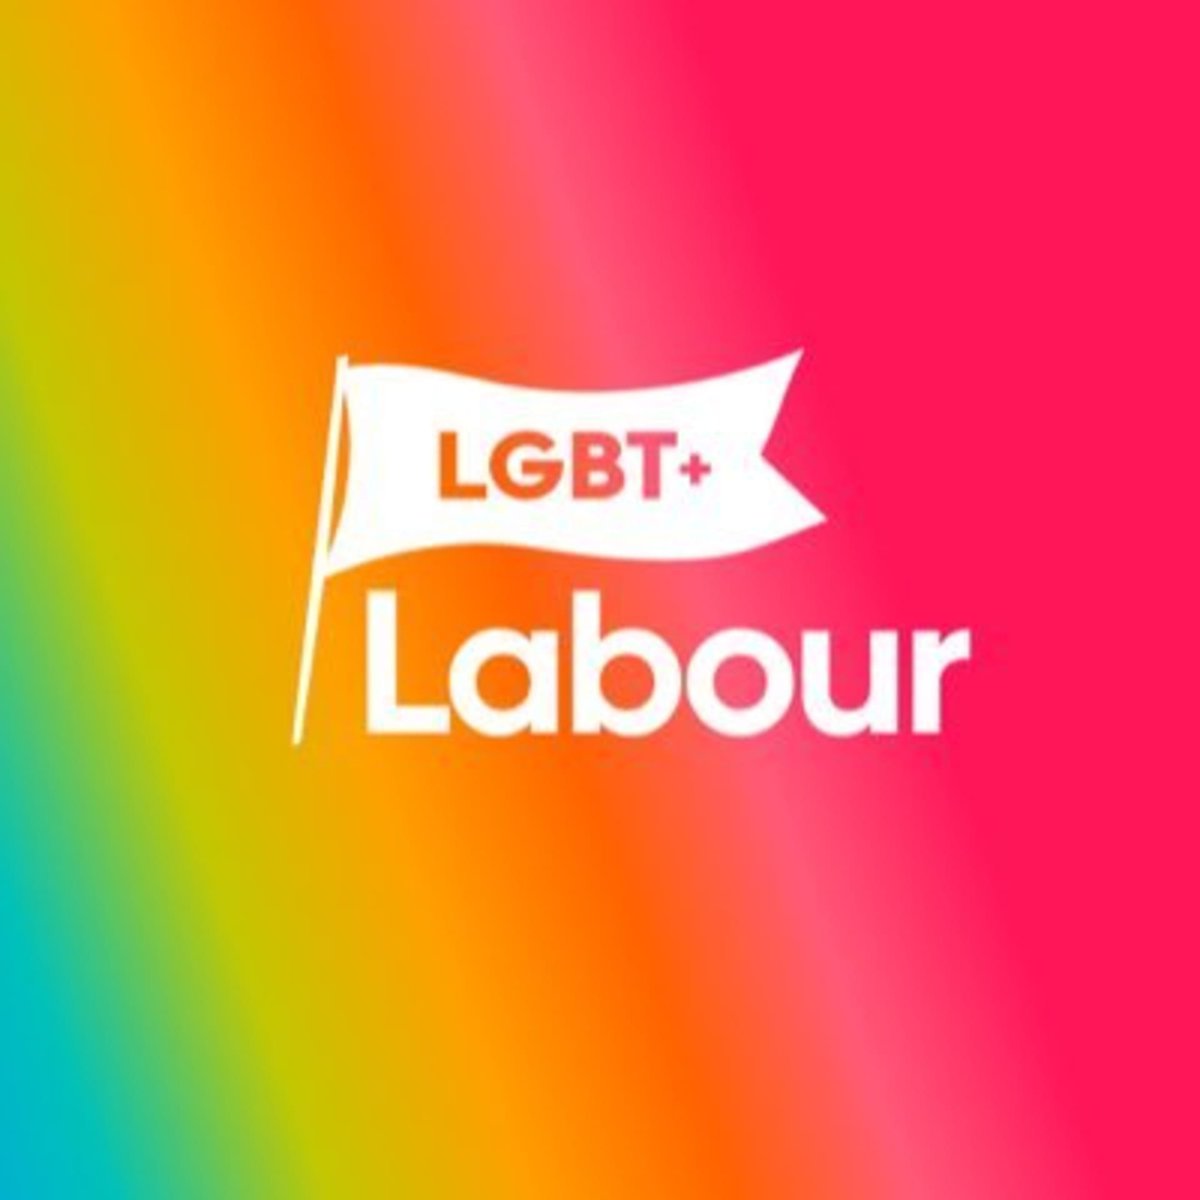  @LGBTLabour signed our open letter against the Nordic Model The Labour Campaign for LGBT+ rights. Campaigning for equality since 1975. Read the letter here  https://decrimnow.org.uk/open-letter-on-the-nordic-model/  #notonordicmodel